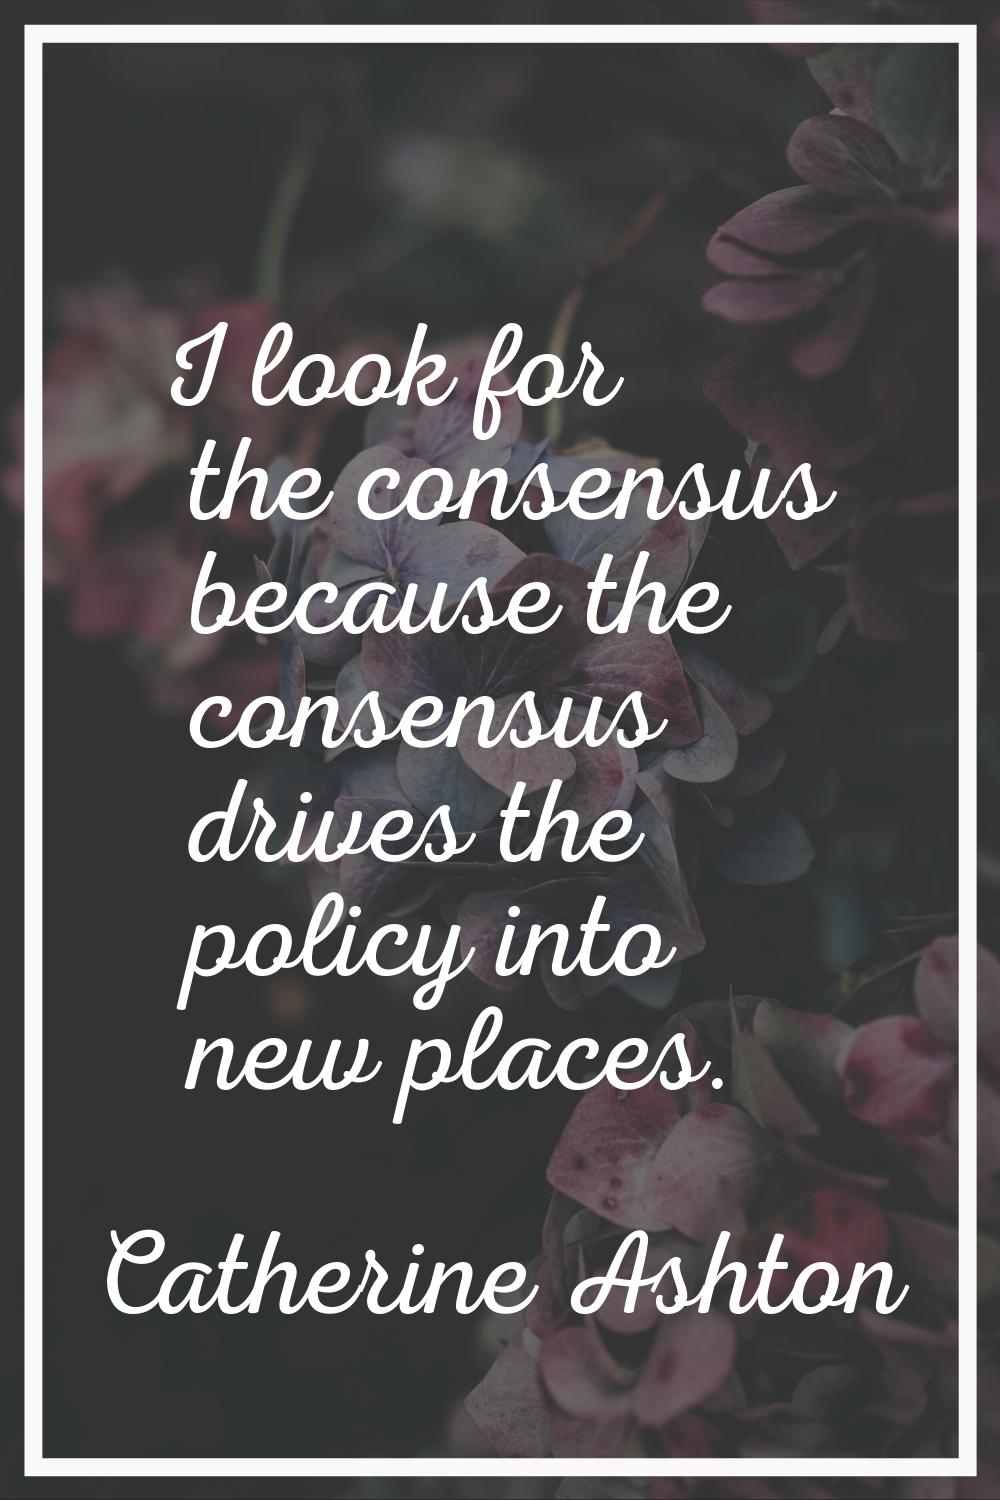 I look for the consensus because the consensus drives the policy into new places.